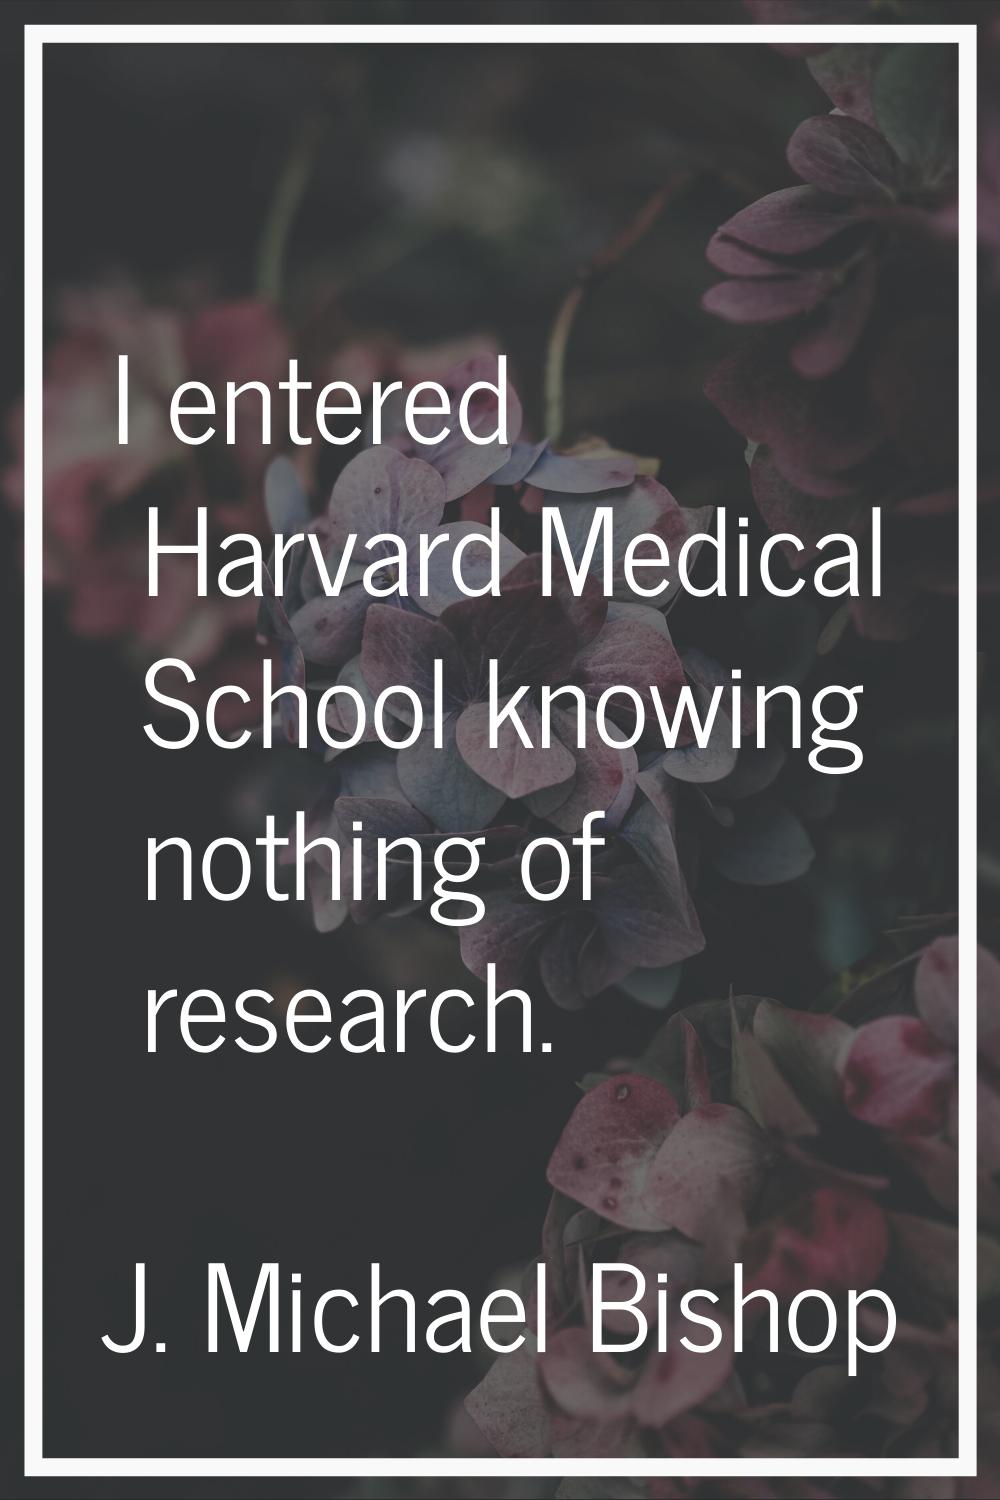 I entered Harvard Medical School knowing nothing of research.